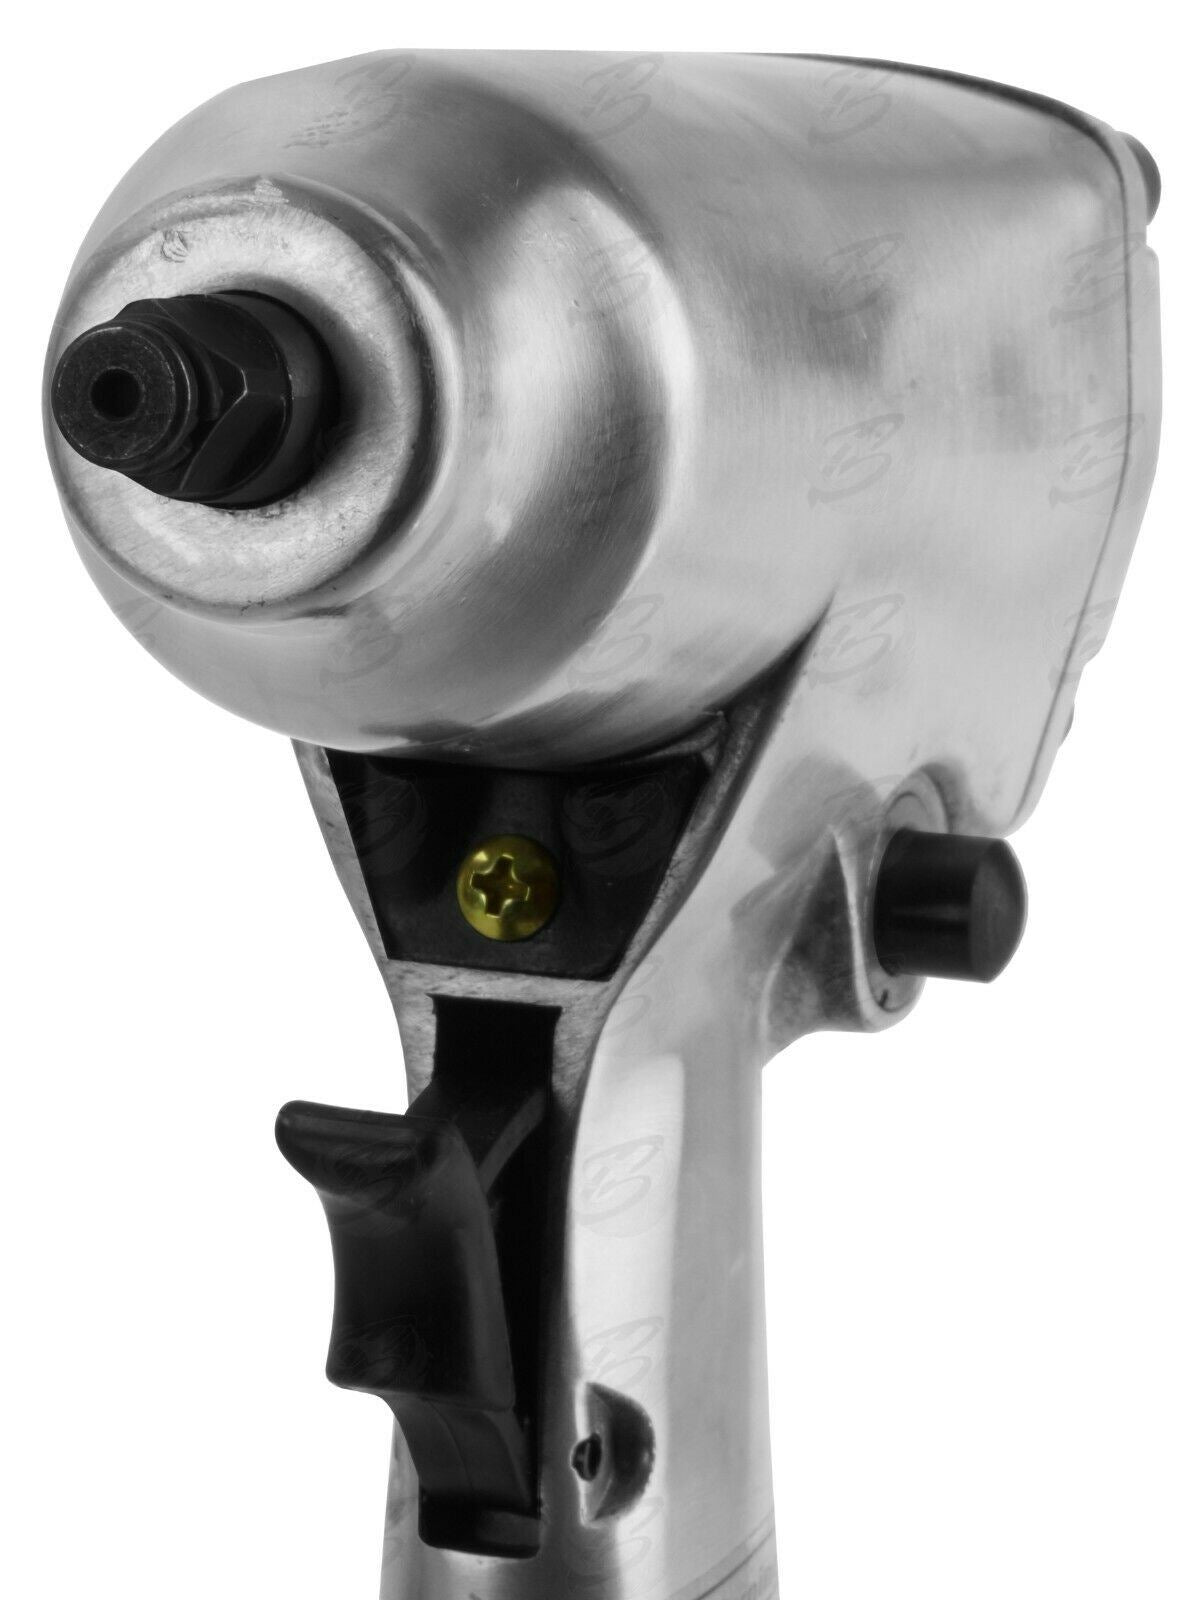 BERGEN 3/8" DRIVE AIR IMPACT WRENCH 176Nm